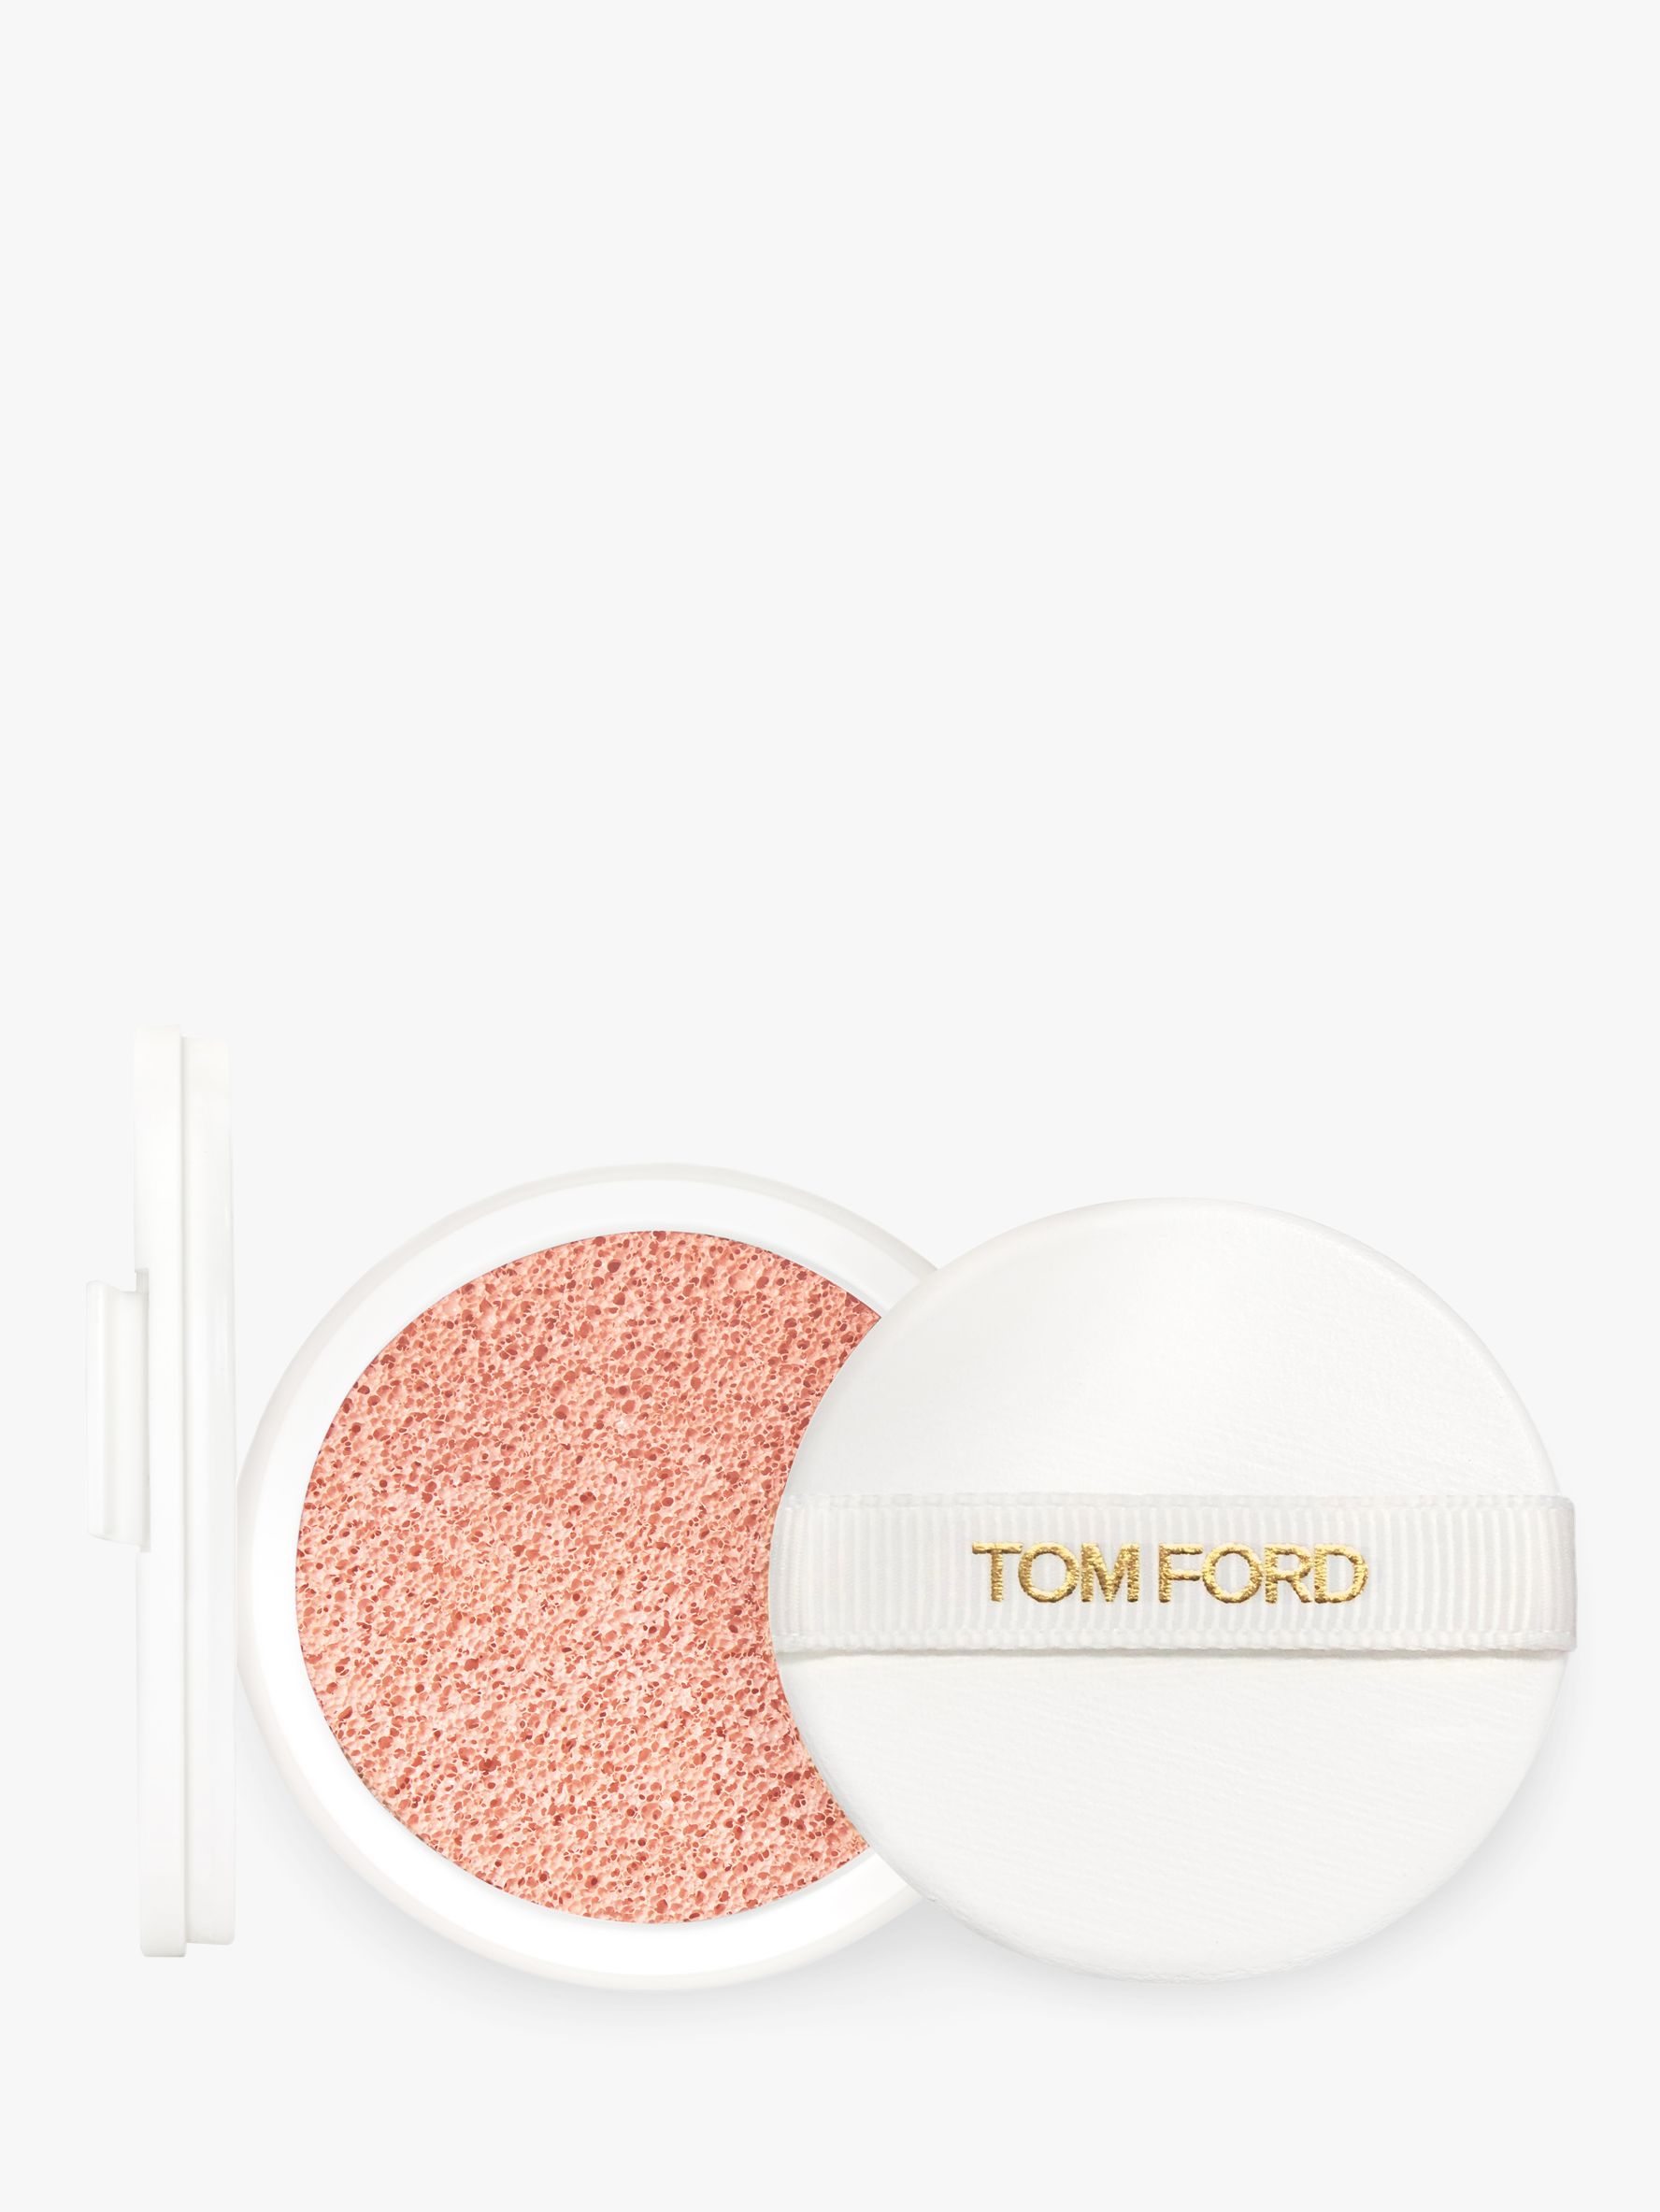 TOM FORD Glow Tone Up Foundation SPF 40 Hydrating Cushion Compact  Foundation Refill